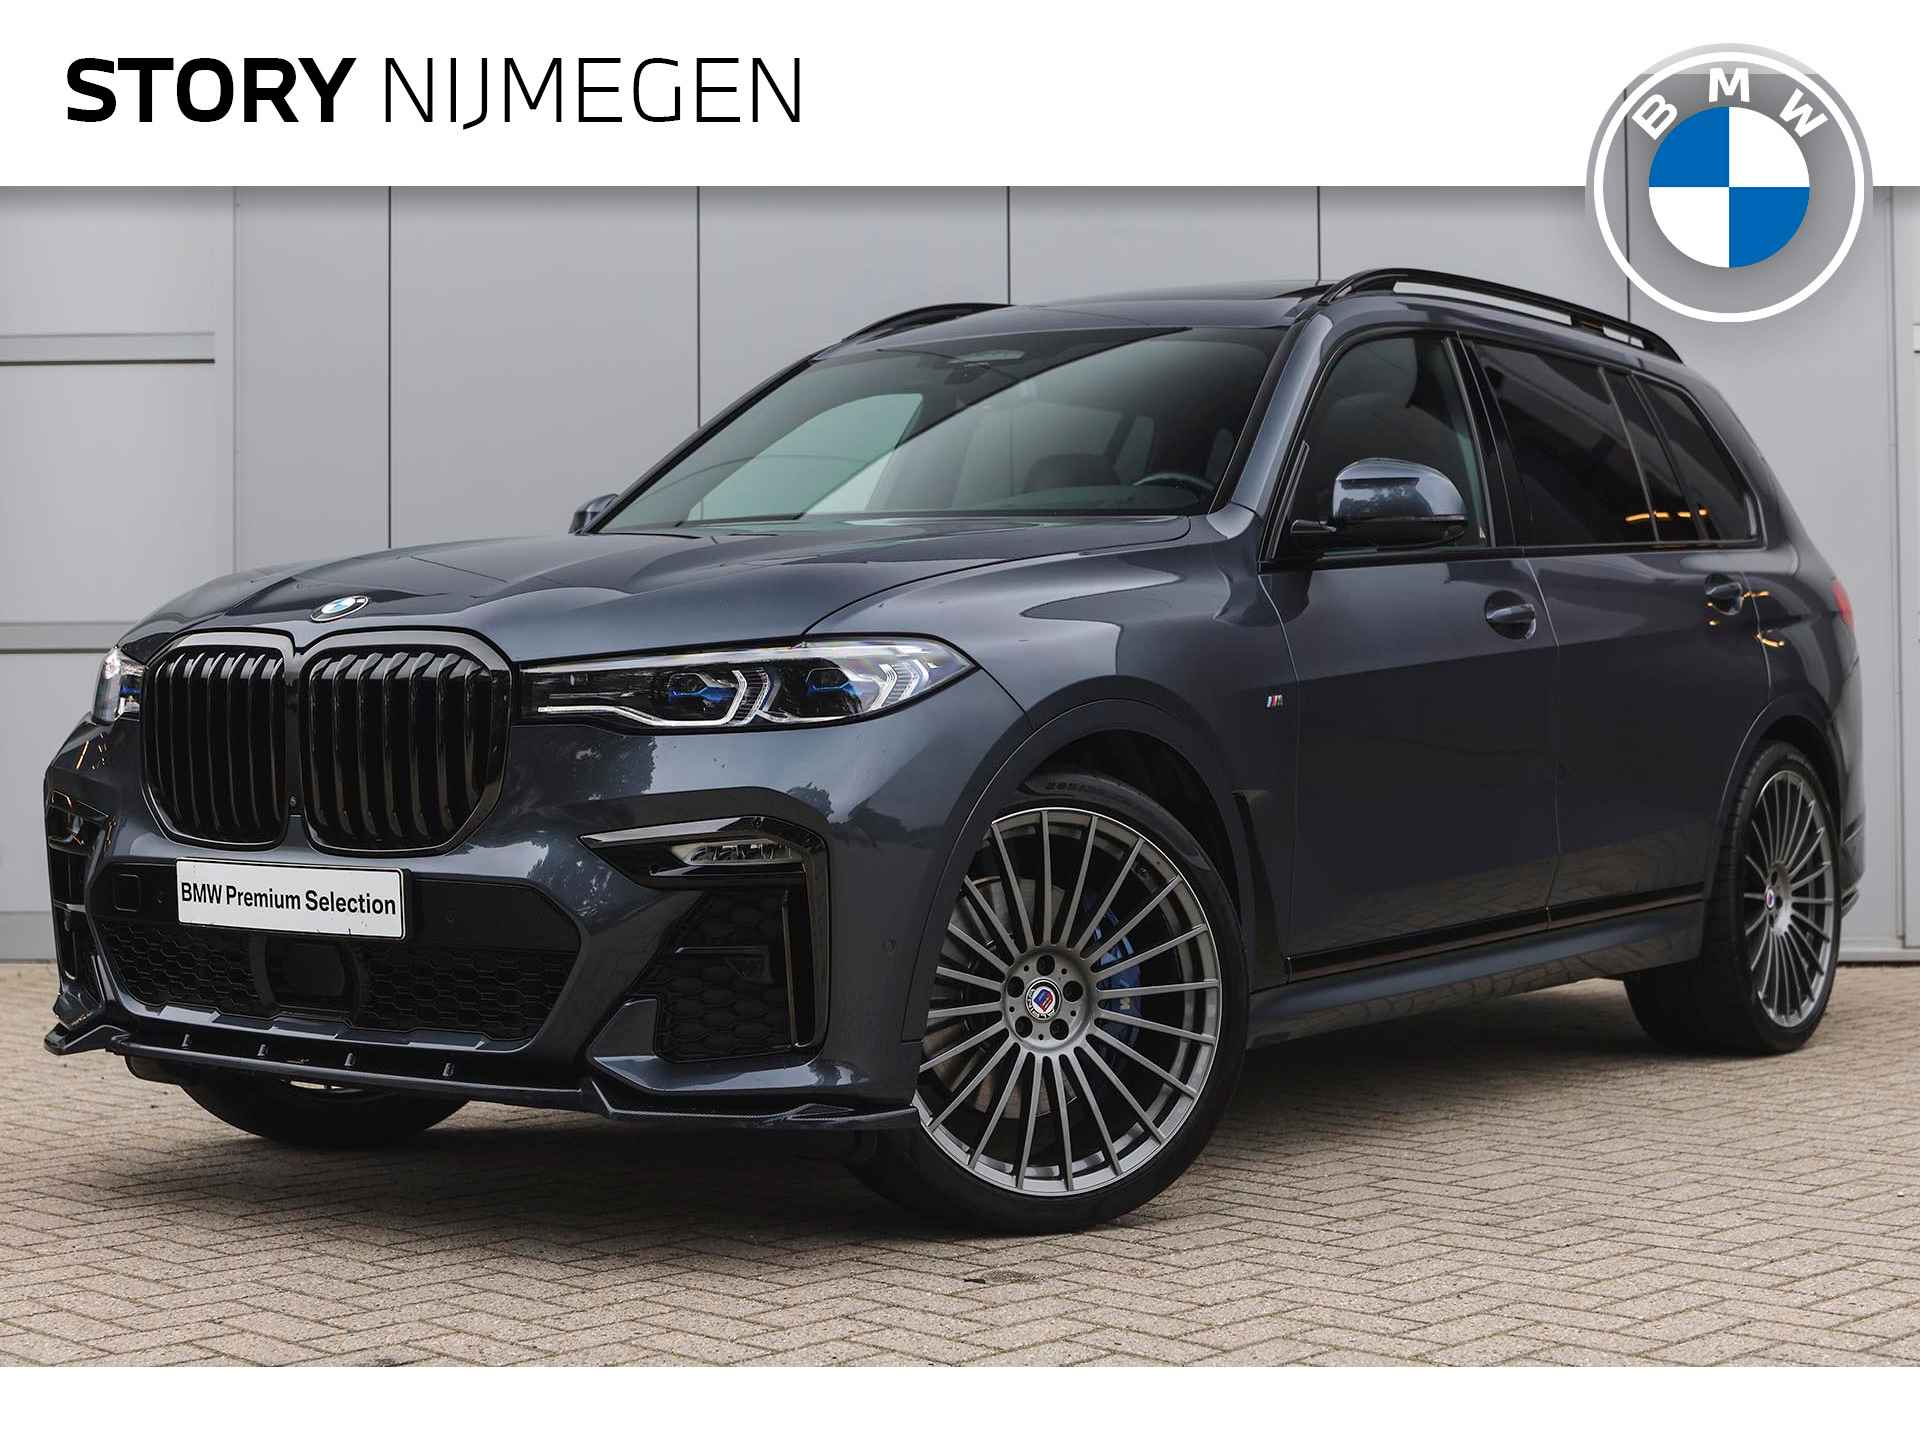 BMW X7 M50i High Executive Automaat / Active Steering / Stoelventilatie / Laserlight / Soft Close / Head-Up / Gesture Control / Parking Assistant Plus / Alpina wielen 23 inch - 1/56